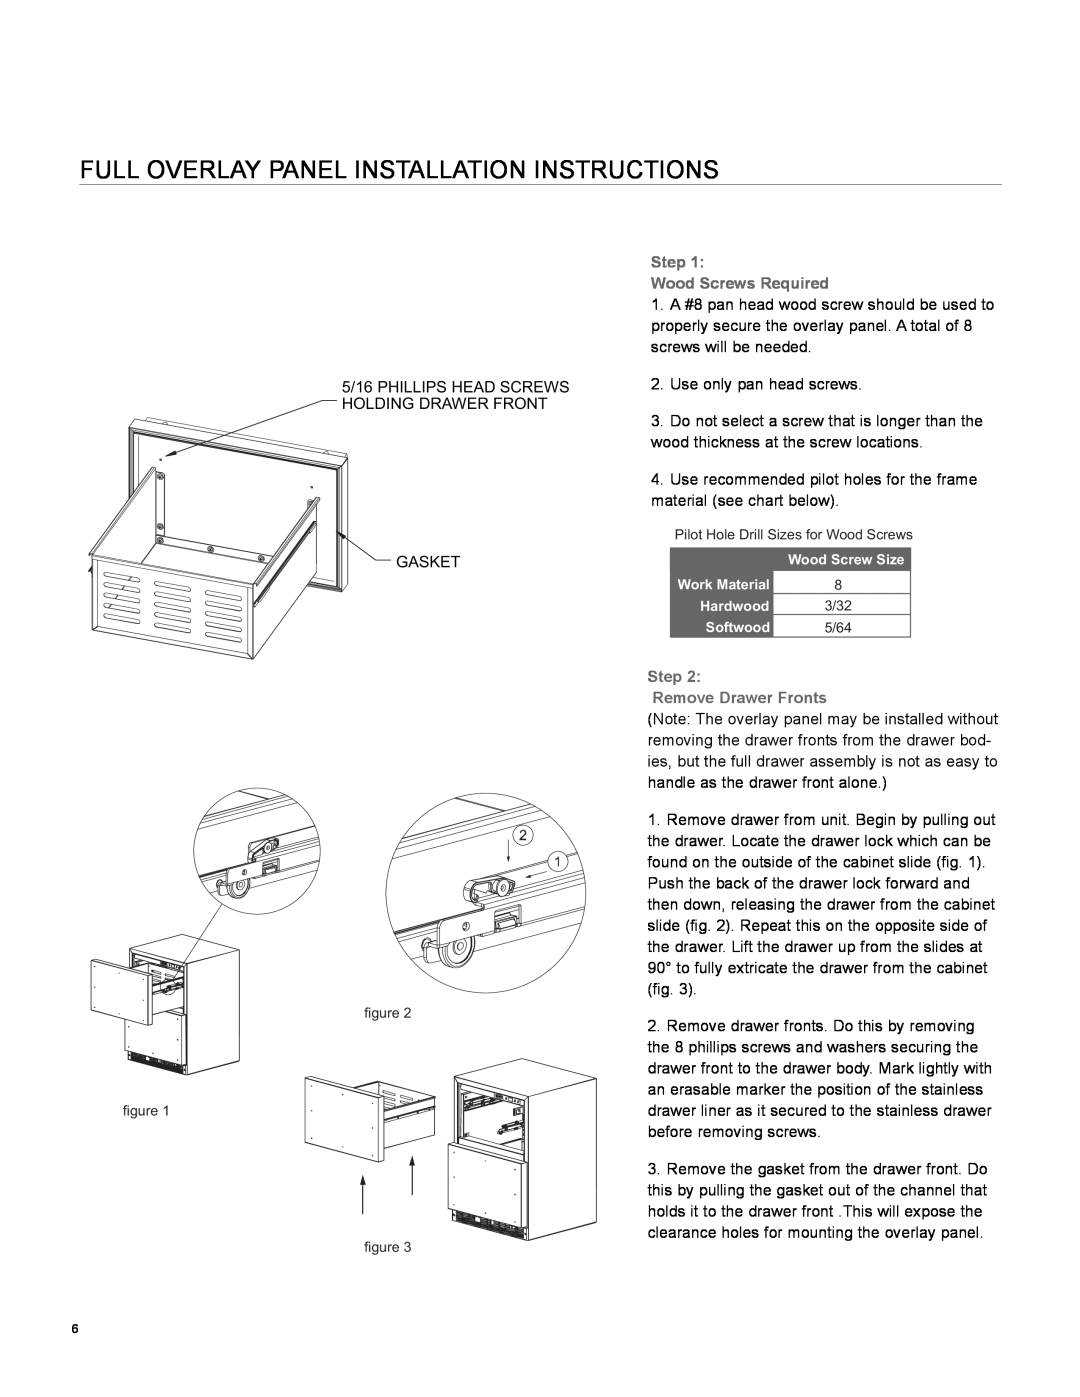 Marvel Industries 60RD Full Overlay Panel Installation Instructions, Step Wood Screws Required, Step Remove Drawer Fronts 